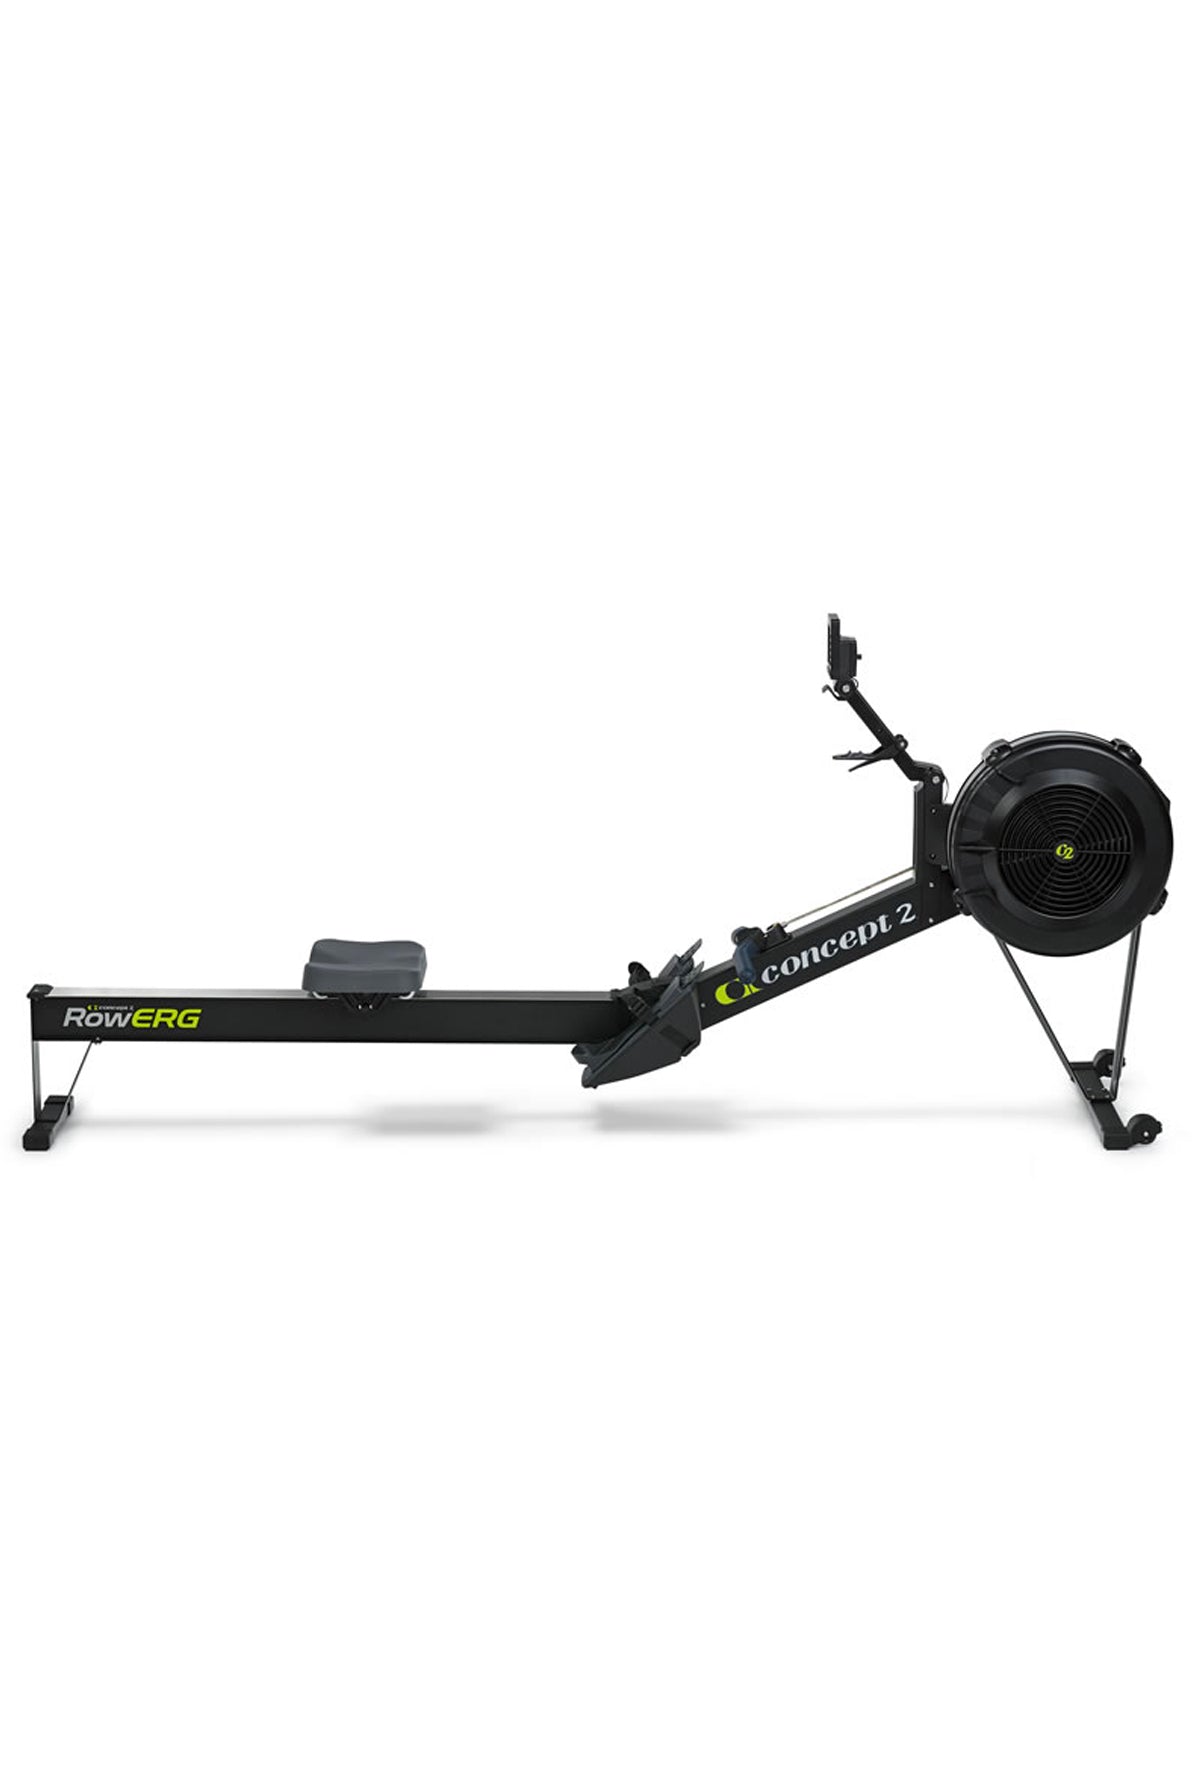 Concept2 RowErg - Tall legs--seat height 20